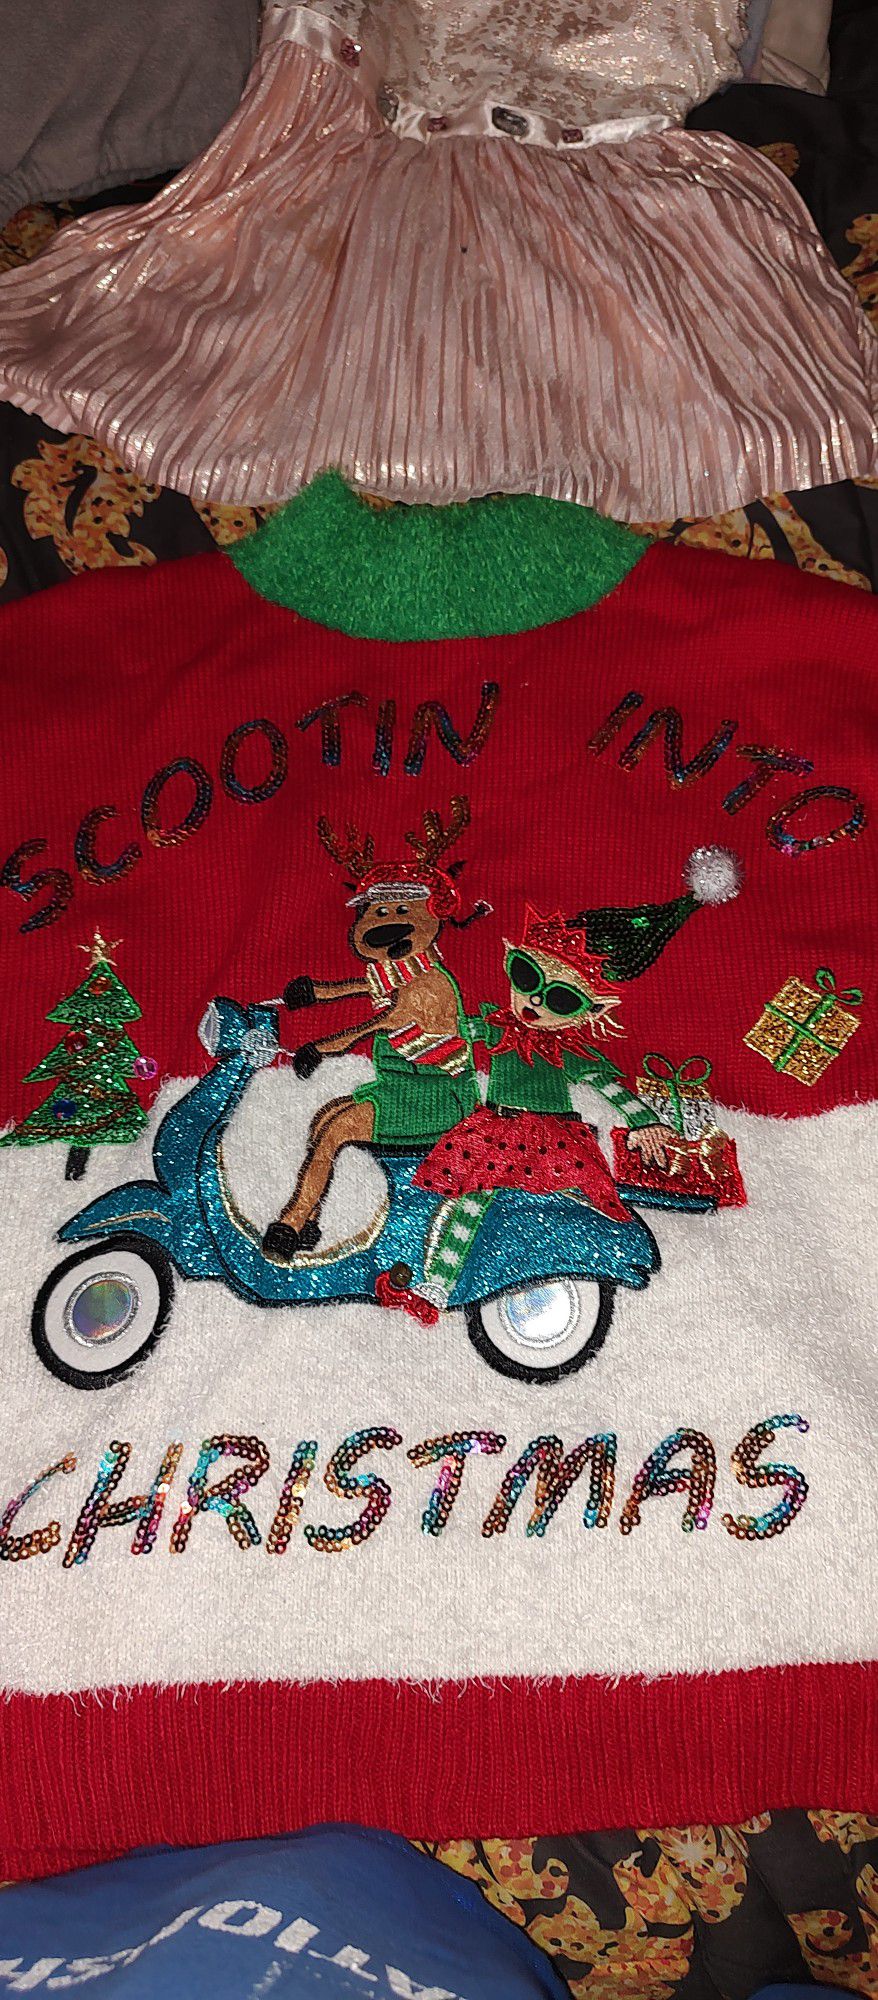 perfect Ugly Christmas sweater for the Holidays may even win the Contest or will be a great Conversation peice